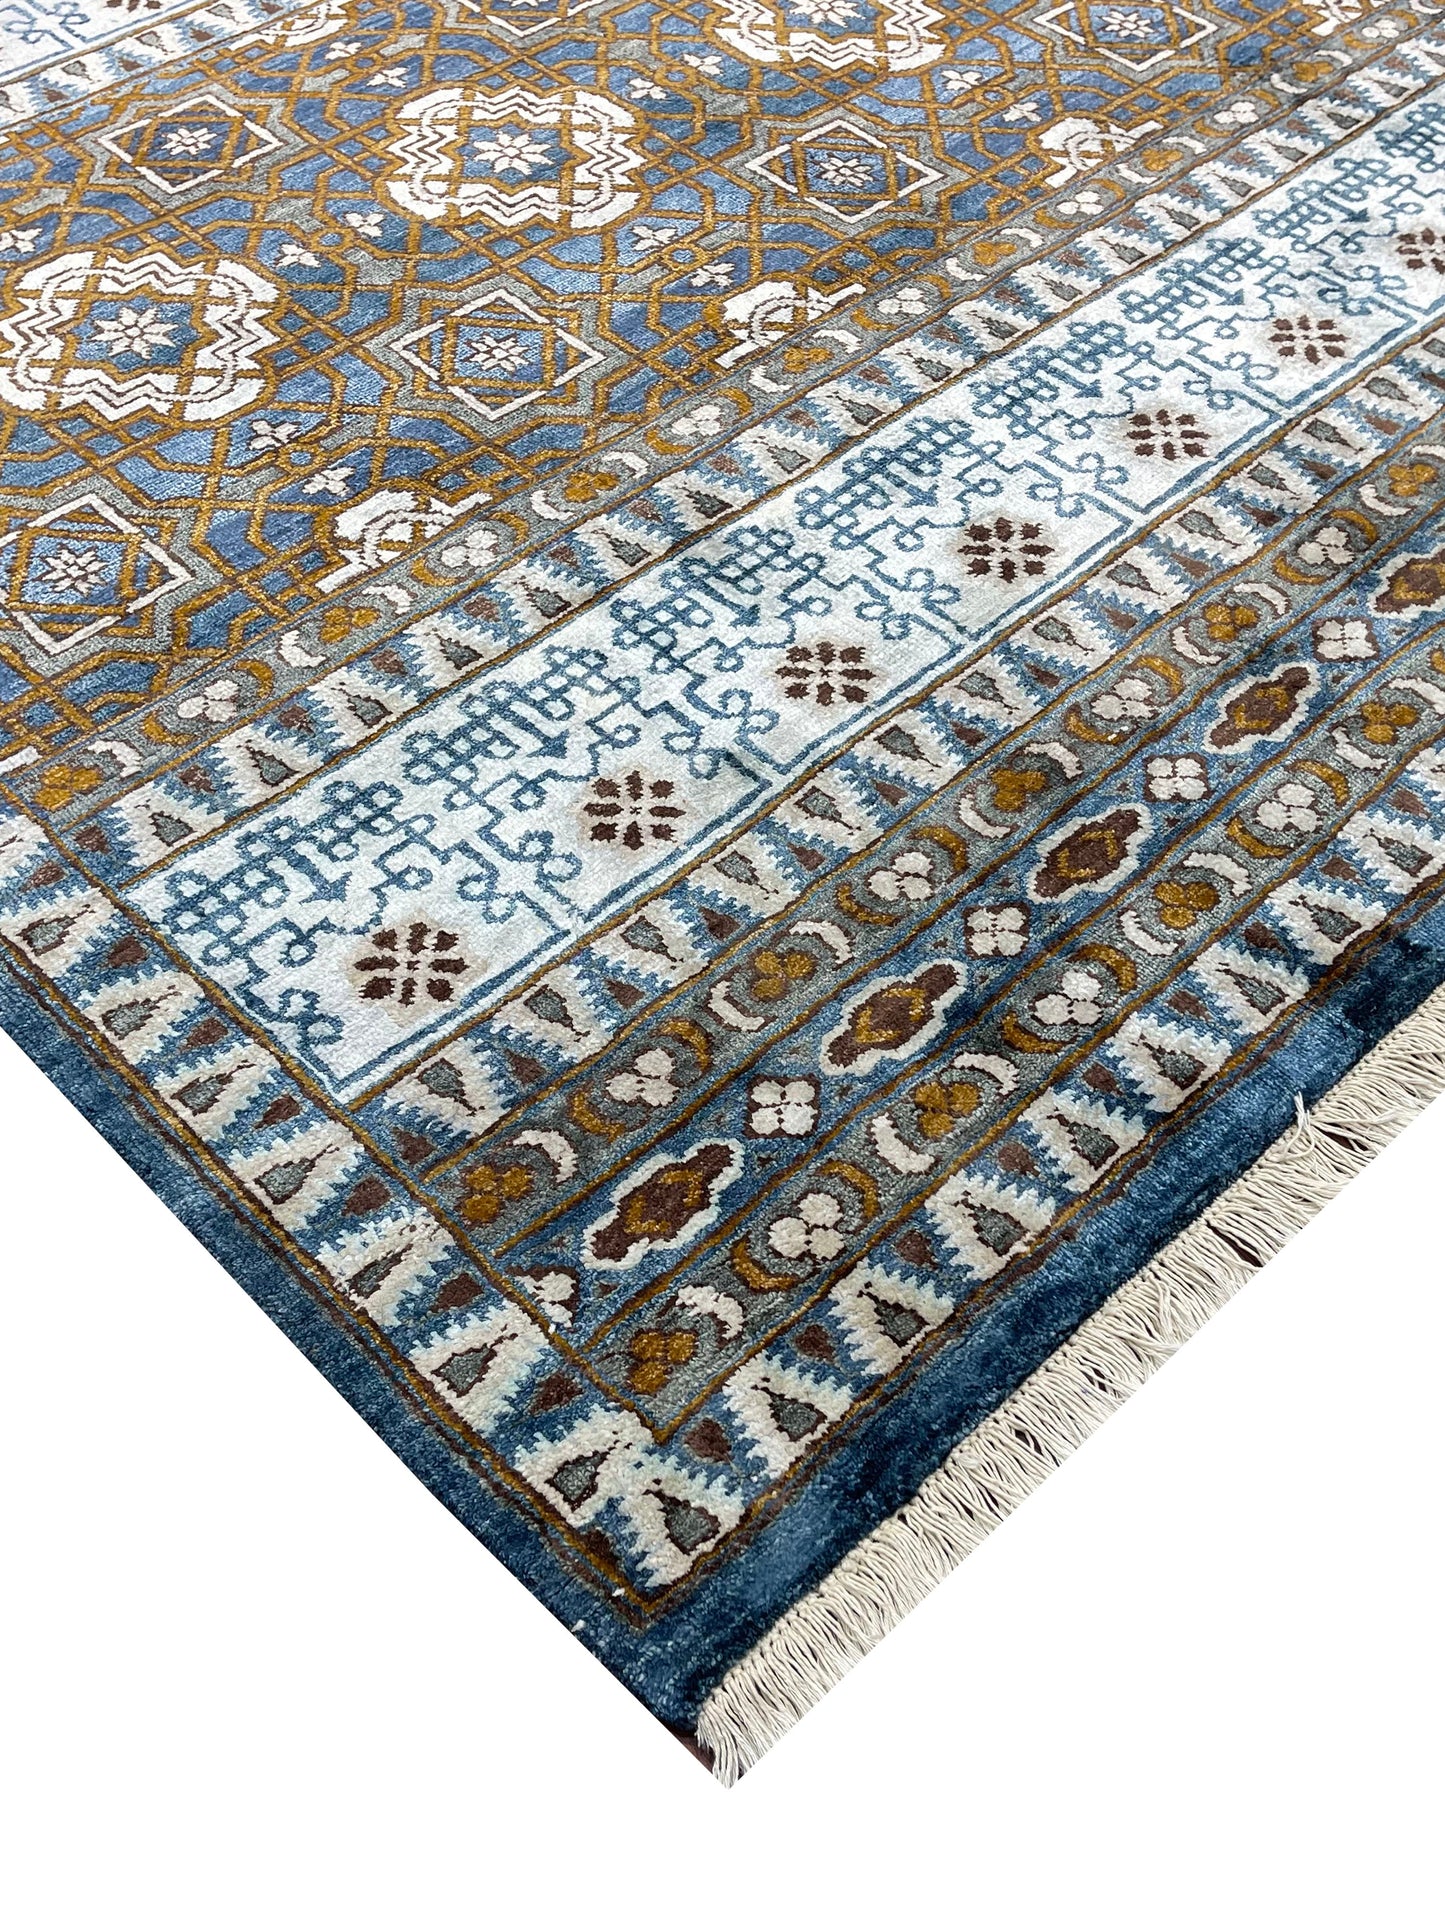 Get trendy with Navy Blue and Ivory Pure Silk Transitional Handknotted Area Rug 6x8.10ft 183X269Cms - Transitional Rugs available at Jaipur Oriental Rugs. Grab yours for $3815.00 today!